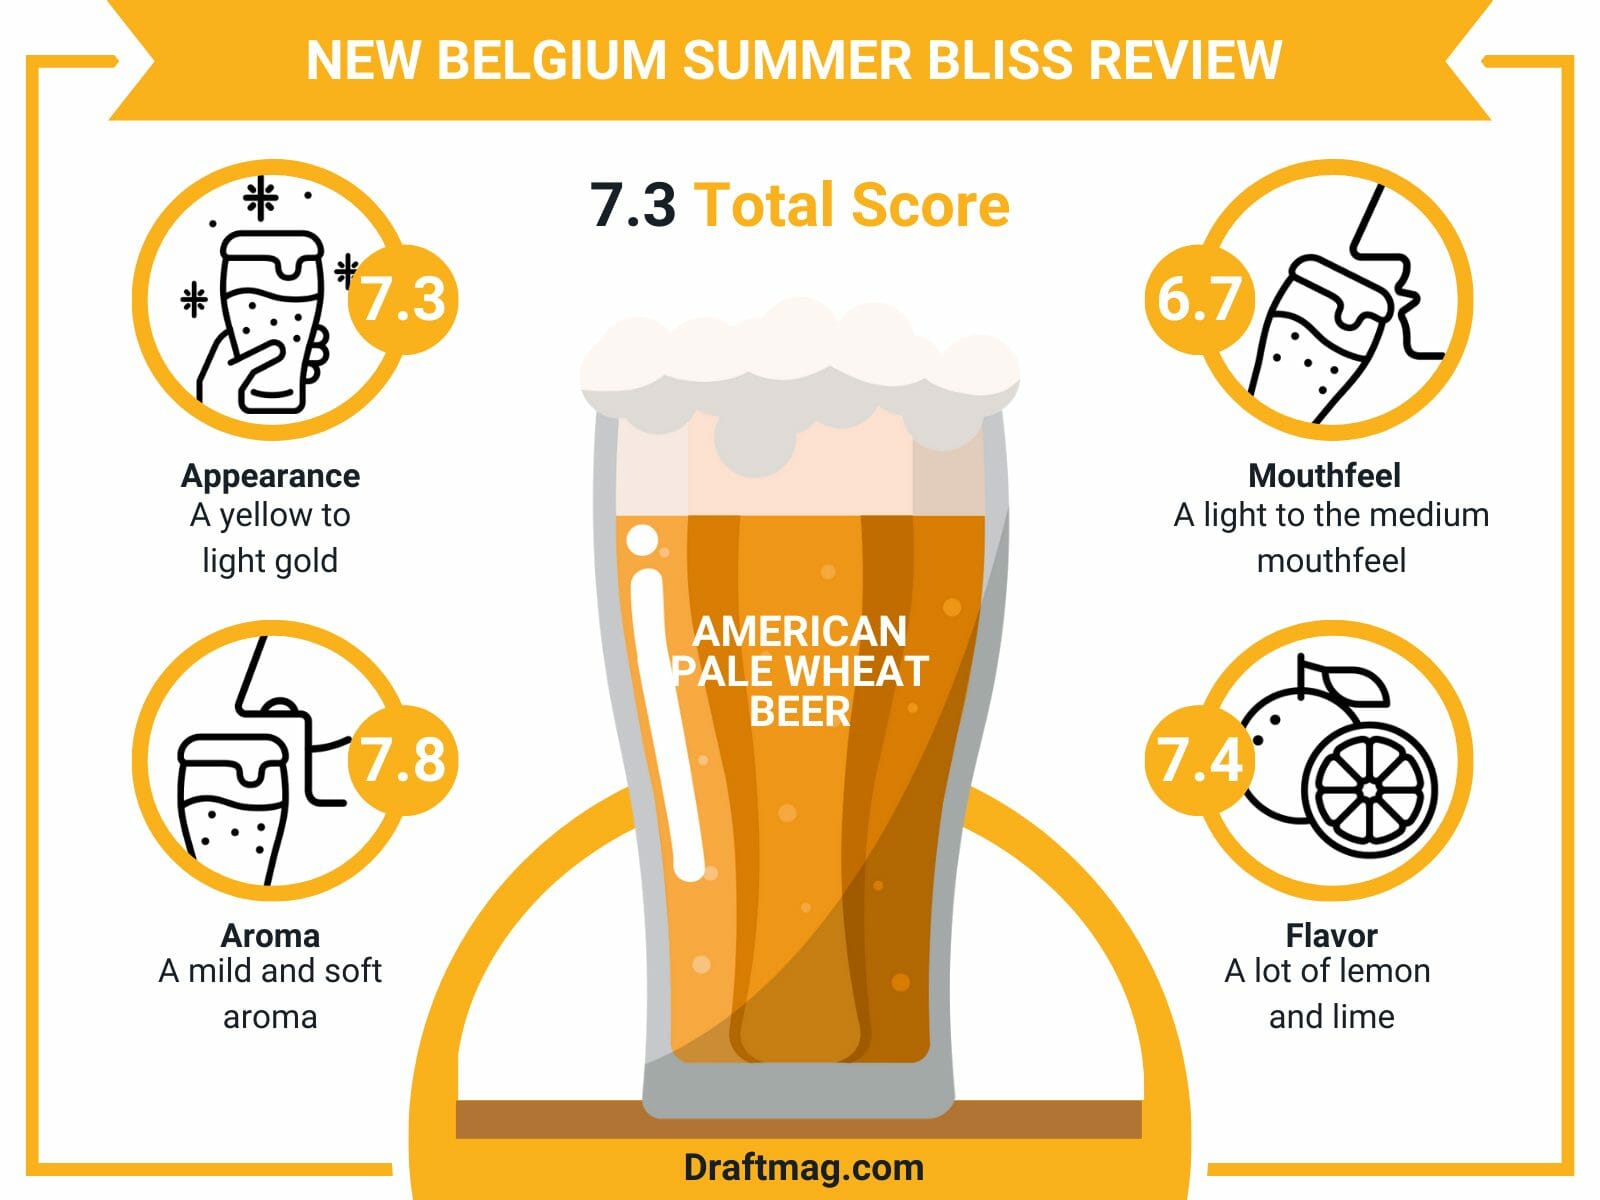 New belgium summer bliss review infographic